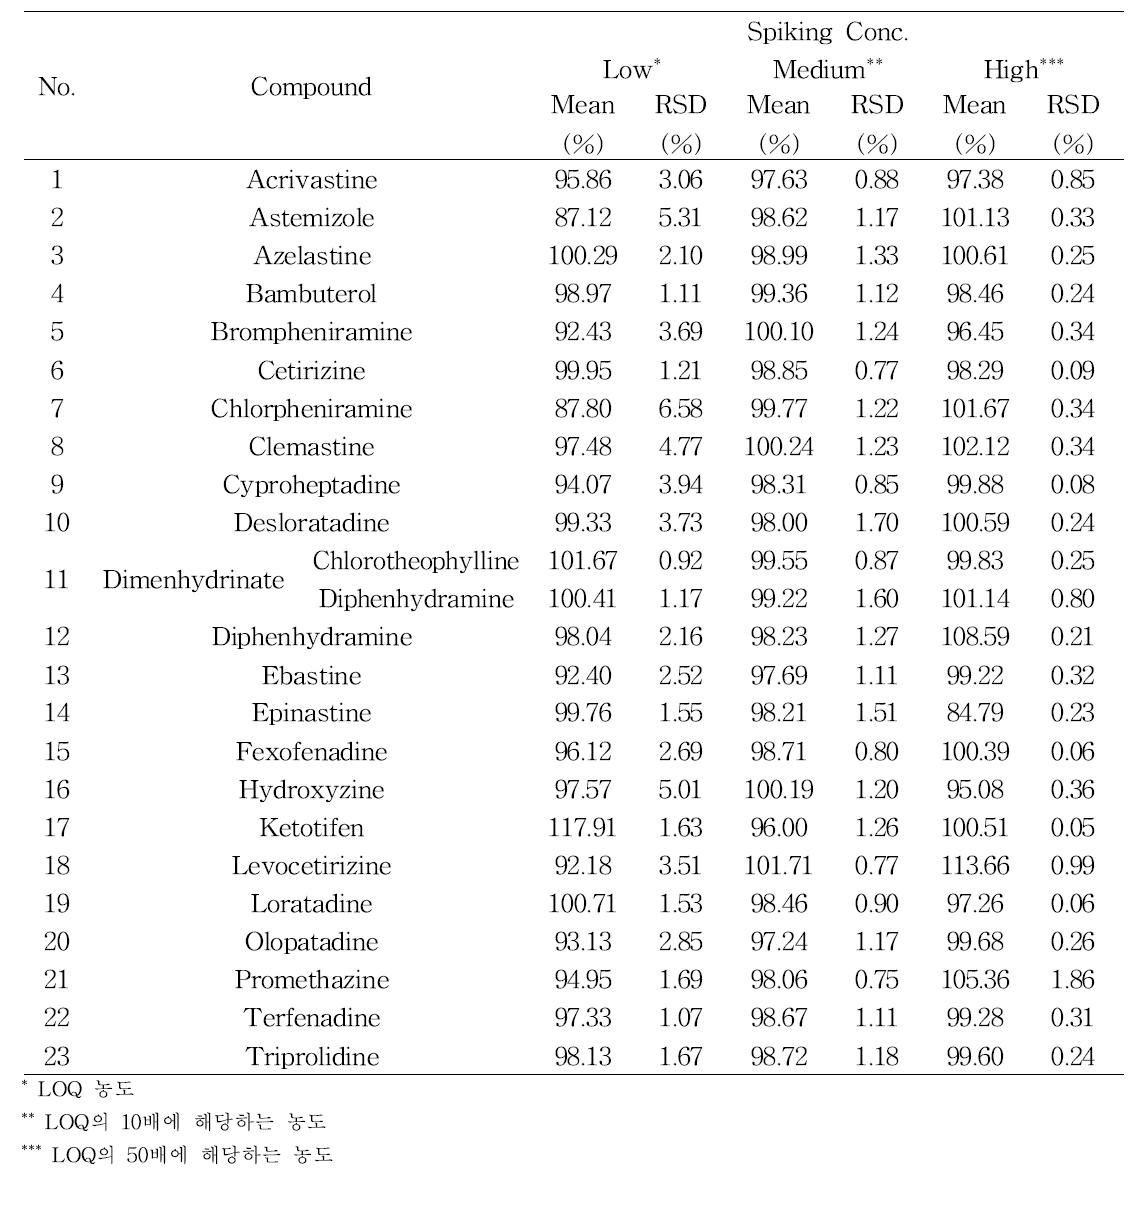 The recovery of 23 antihistamines in powder sample for different concentrations